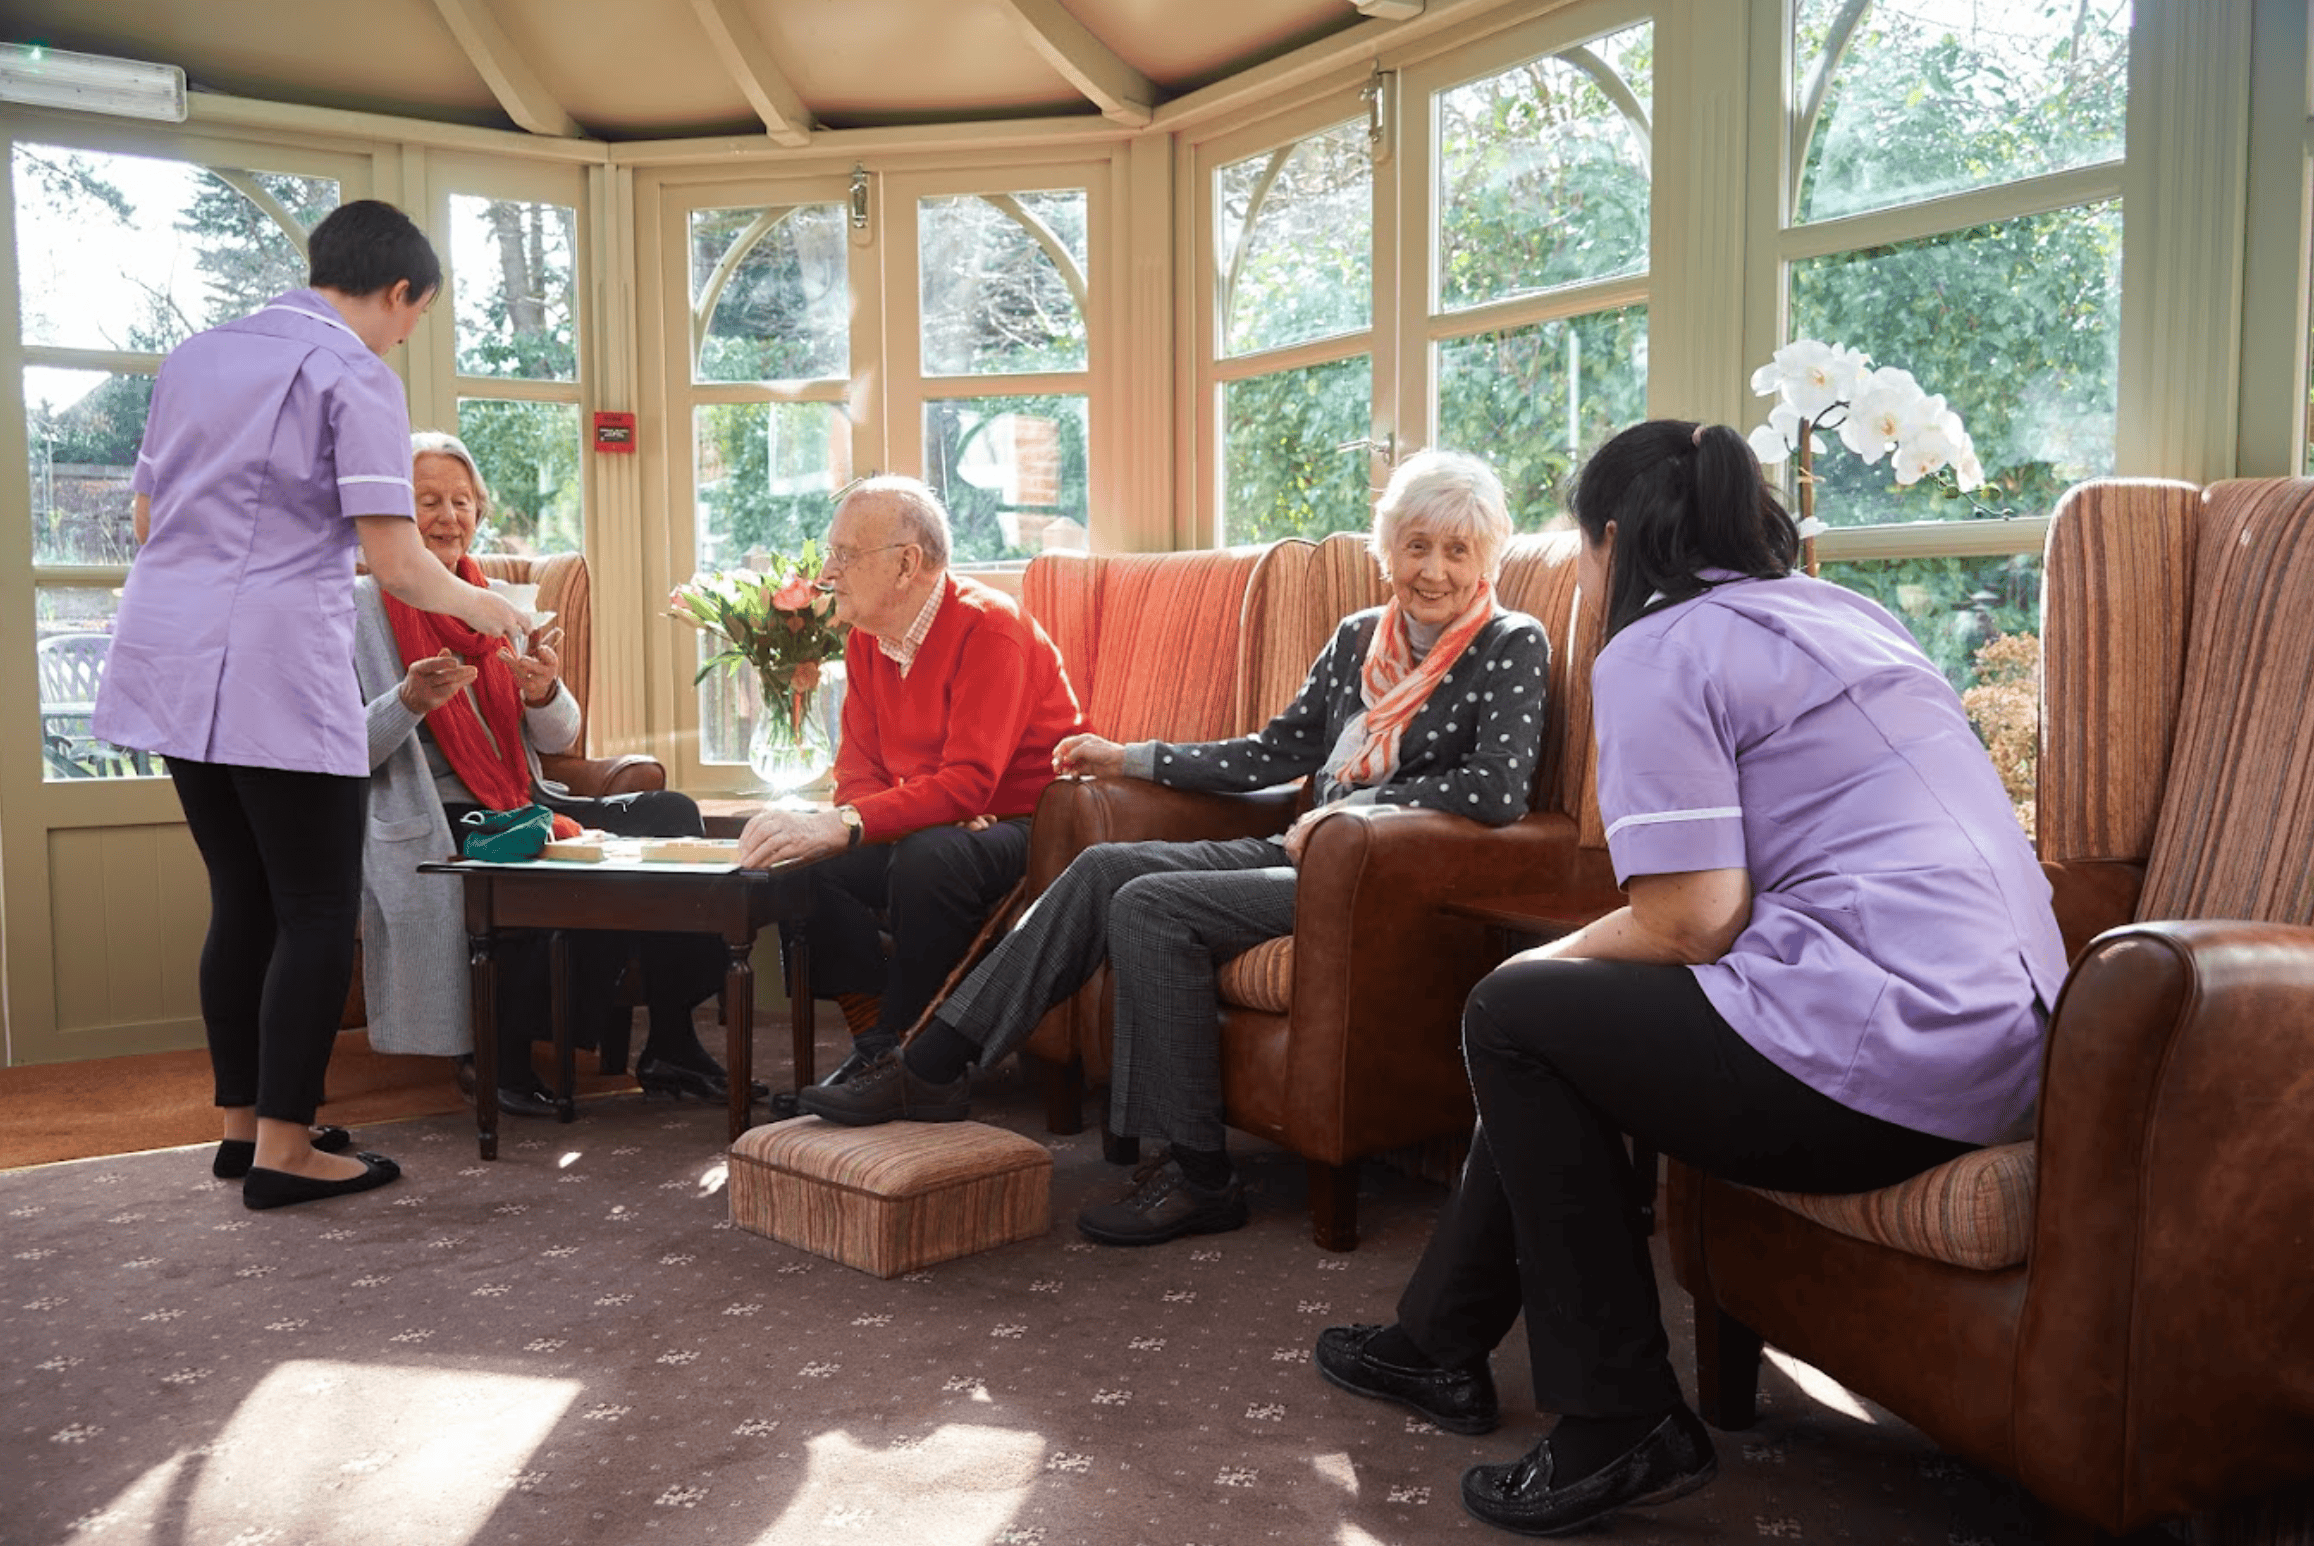 Lounge of Priors Mead Care Home in Reigate, Surrey